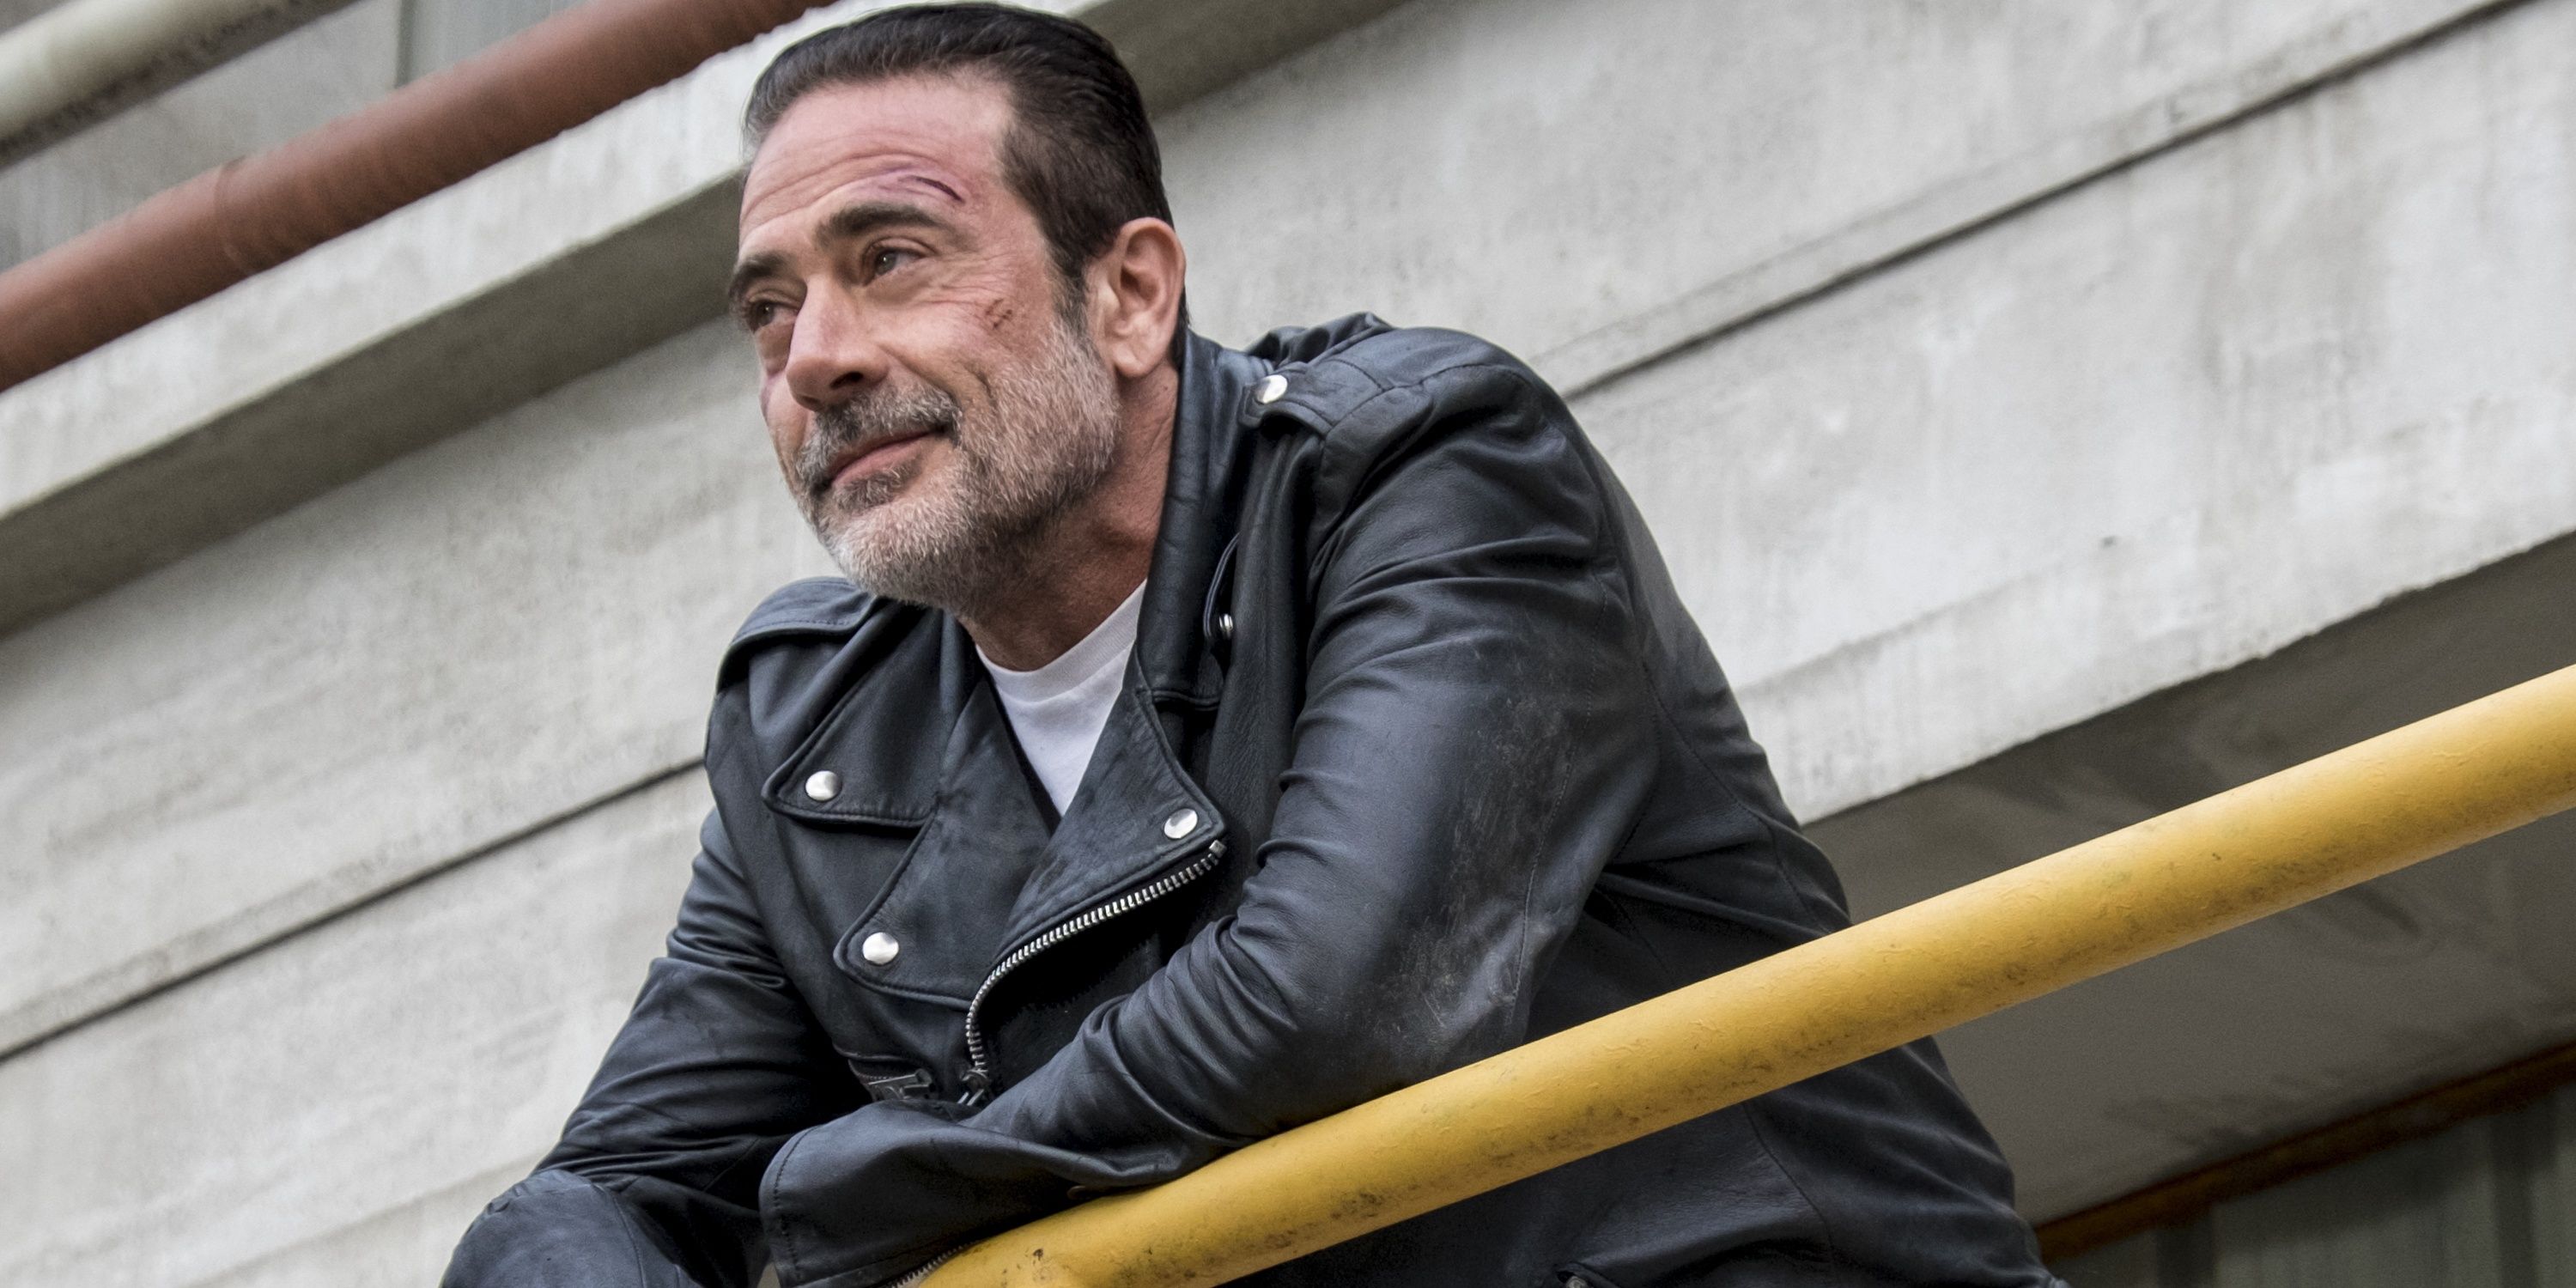 The Walking Dead 5 Reasons Negan Is A Better Leader Than Rick (And 5 Reasons He’s Terrible)